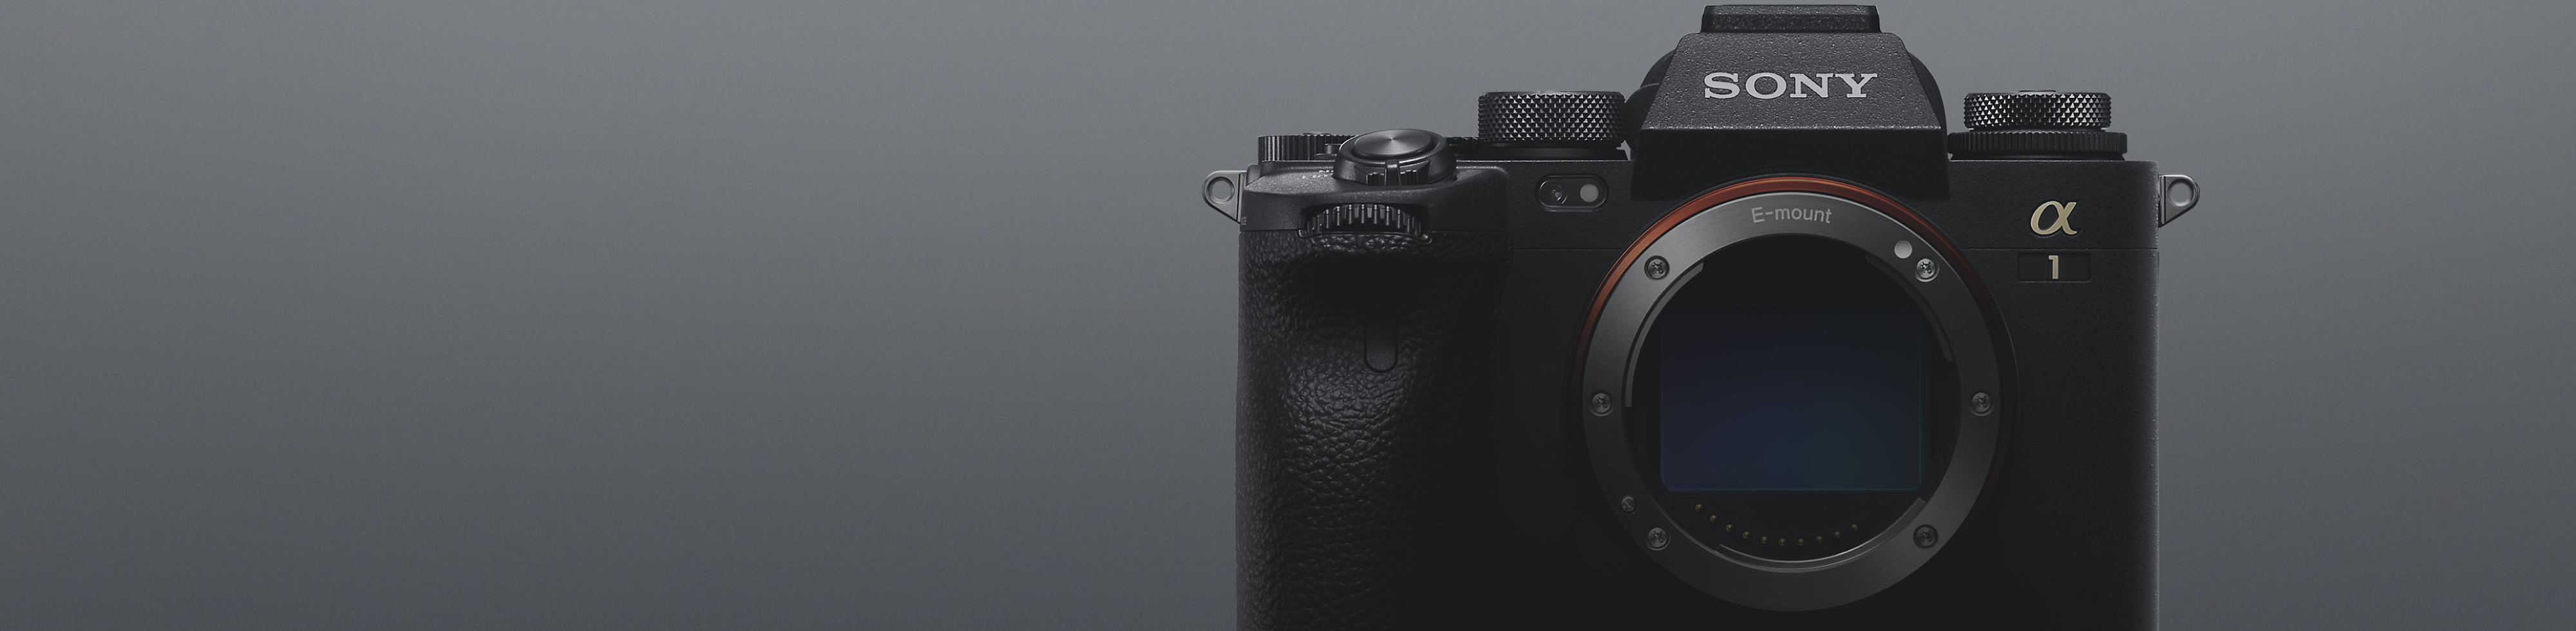 Front view of Sony Alpha 1 on grey background